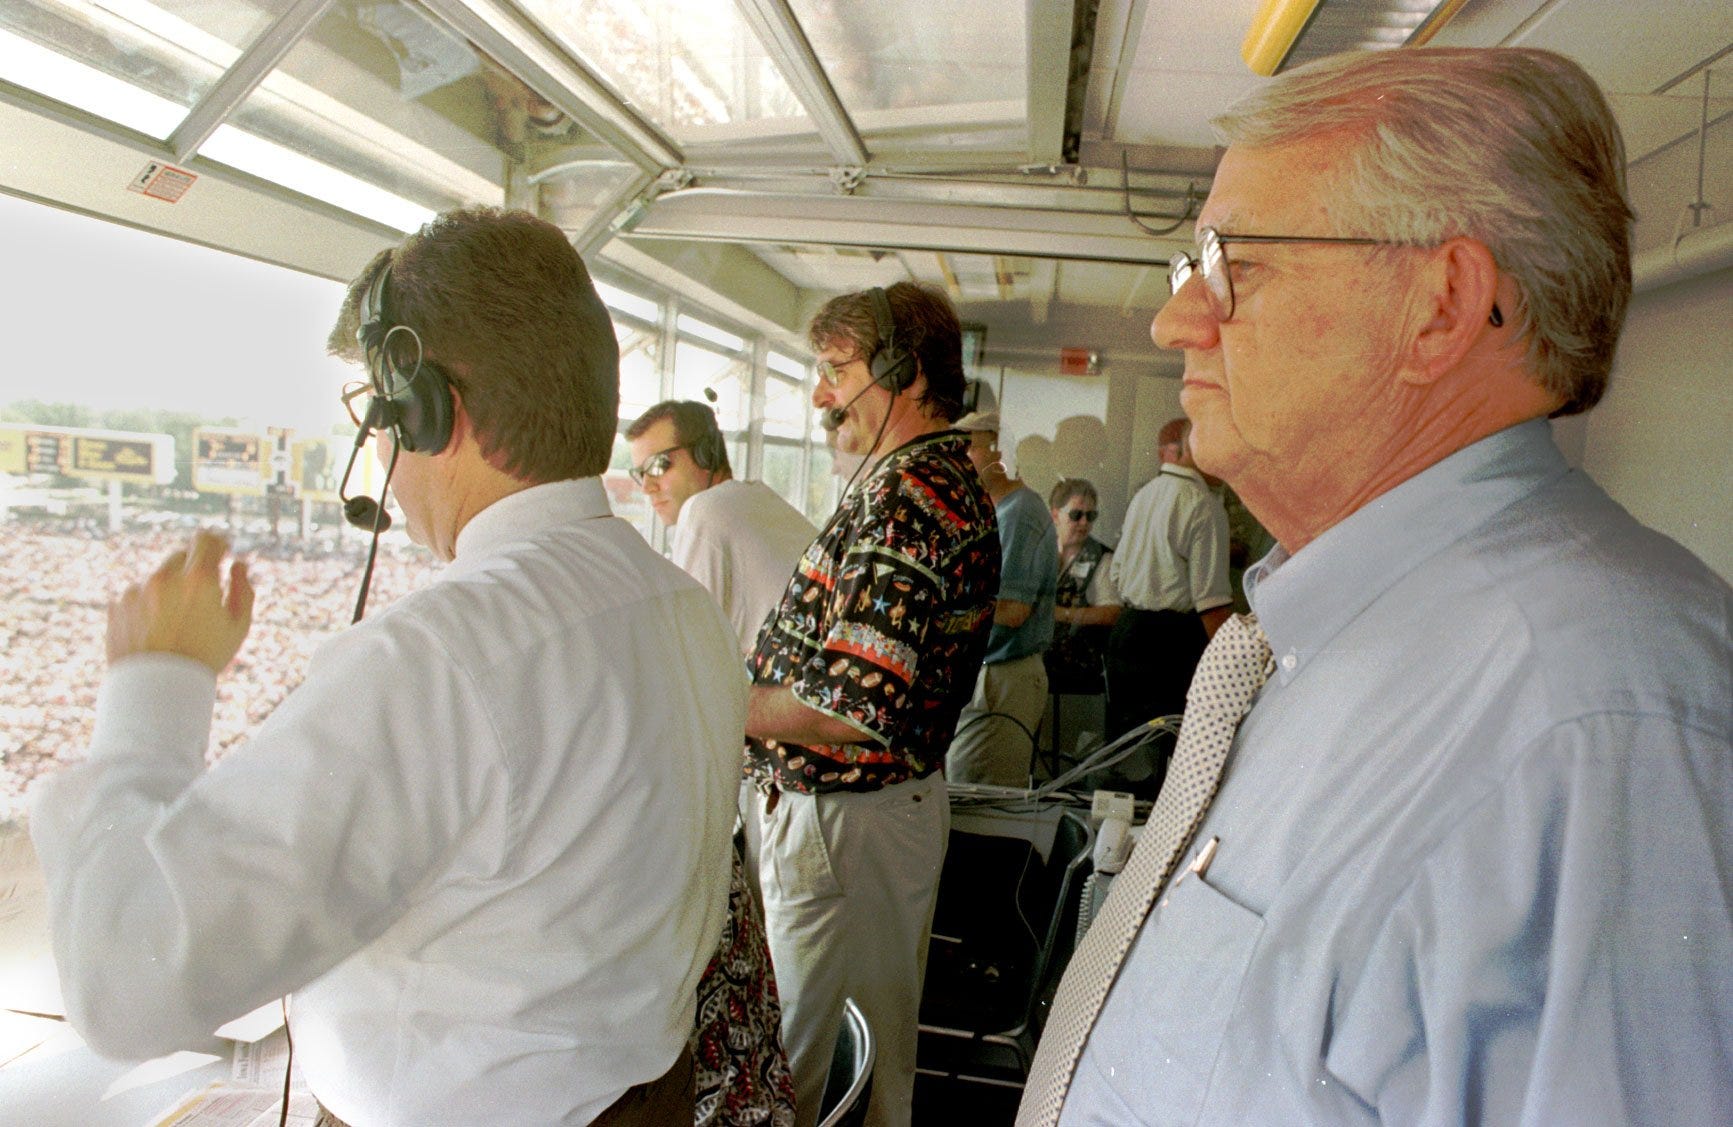 From 1997: Jim Zabel was in an unfamiliar position as an observer at Kinnick Stadium. At left is his replacement, Gary Dolphin, and analyst Ed Podolak.